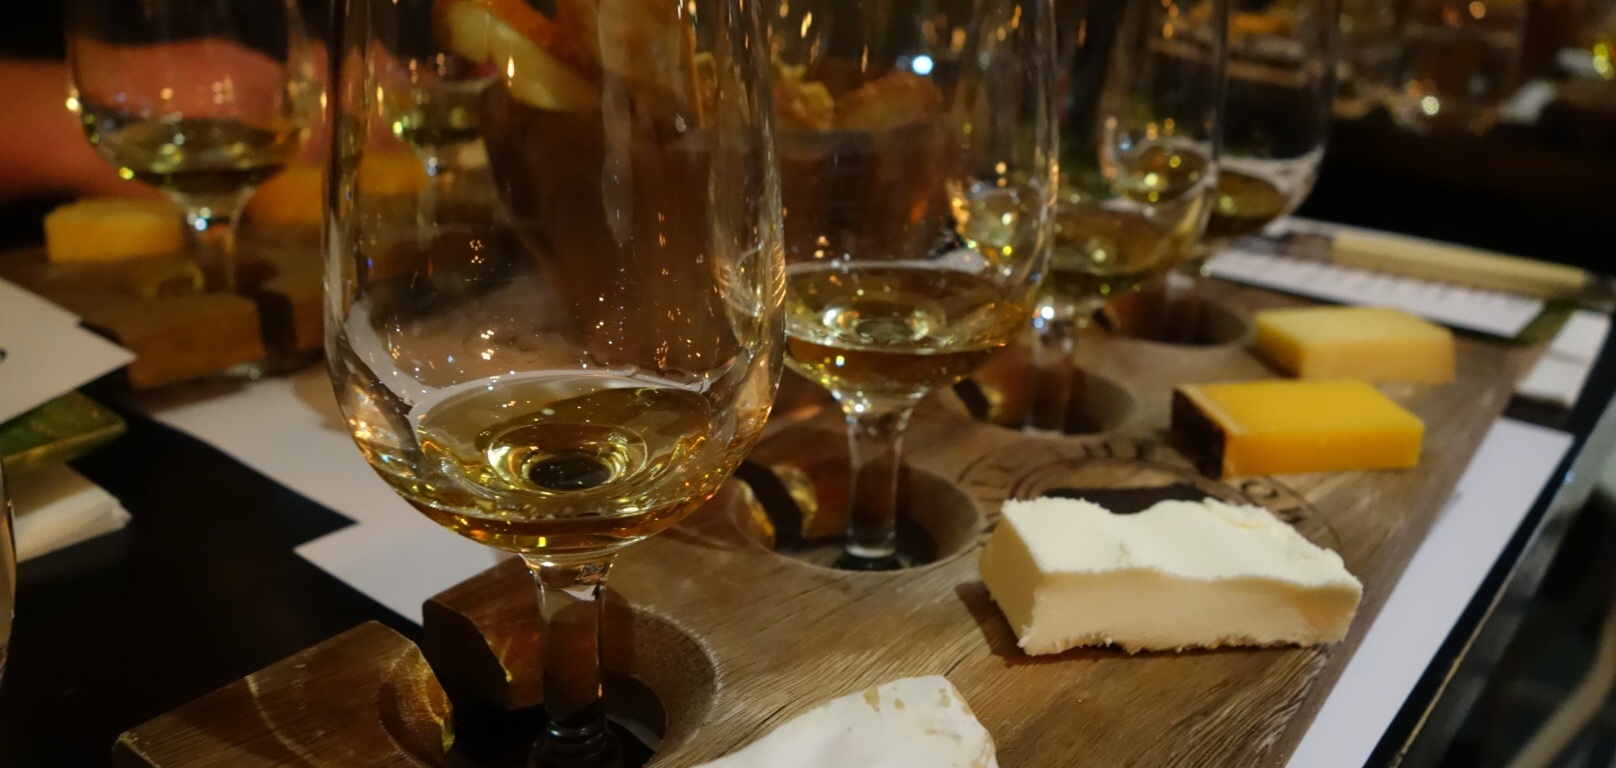 Four cheeses, four whiskeys, a perfect tasting,